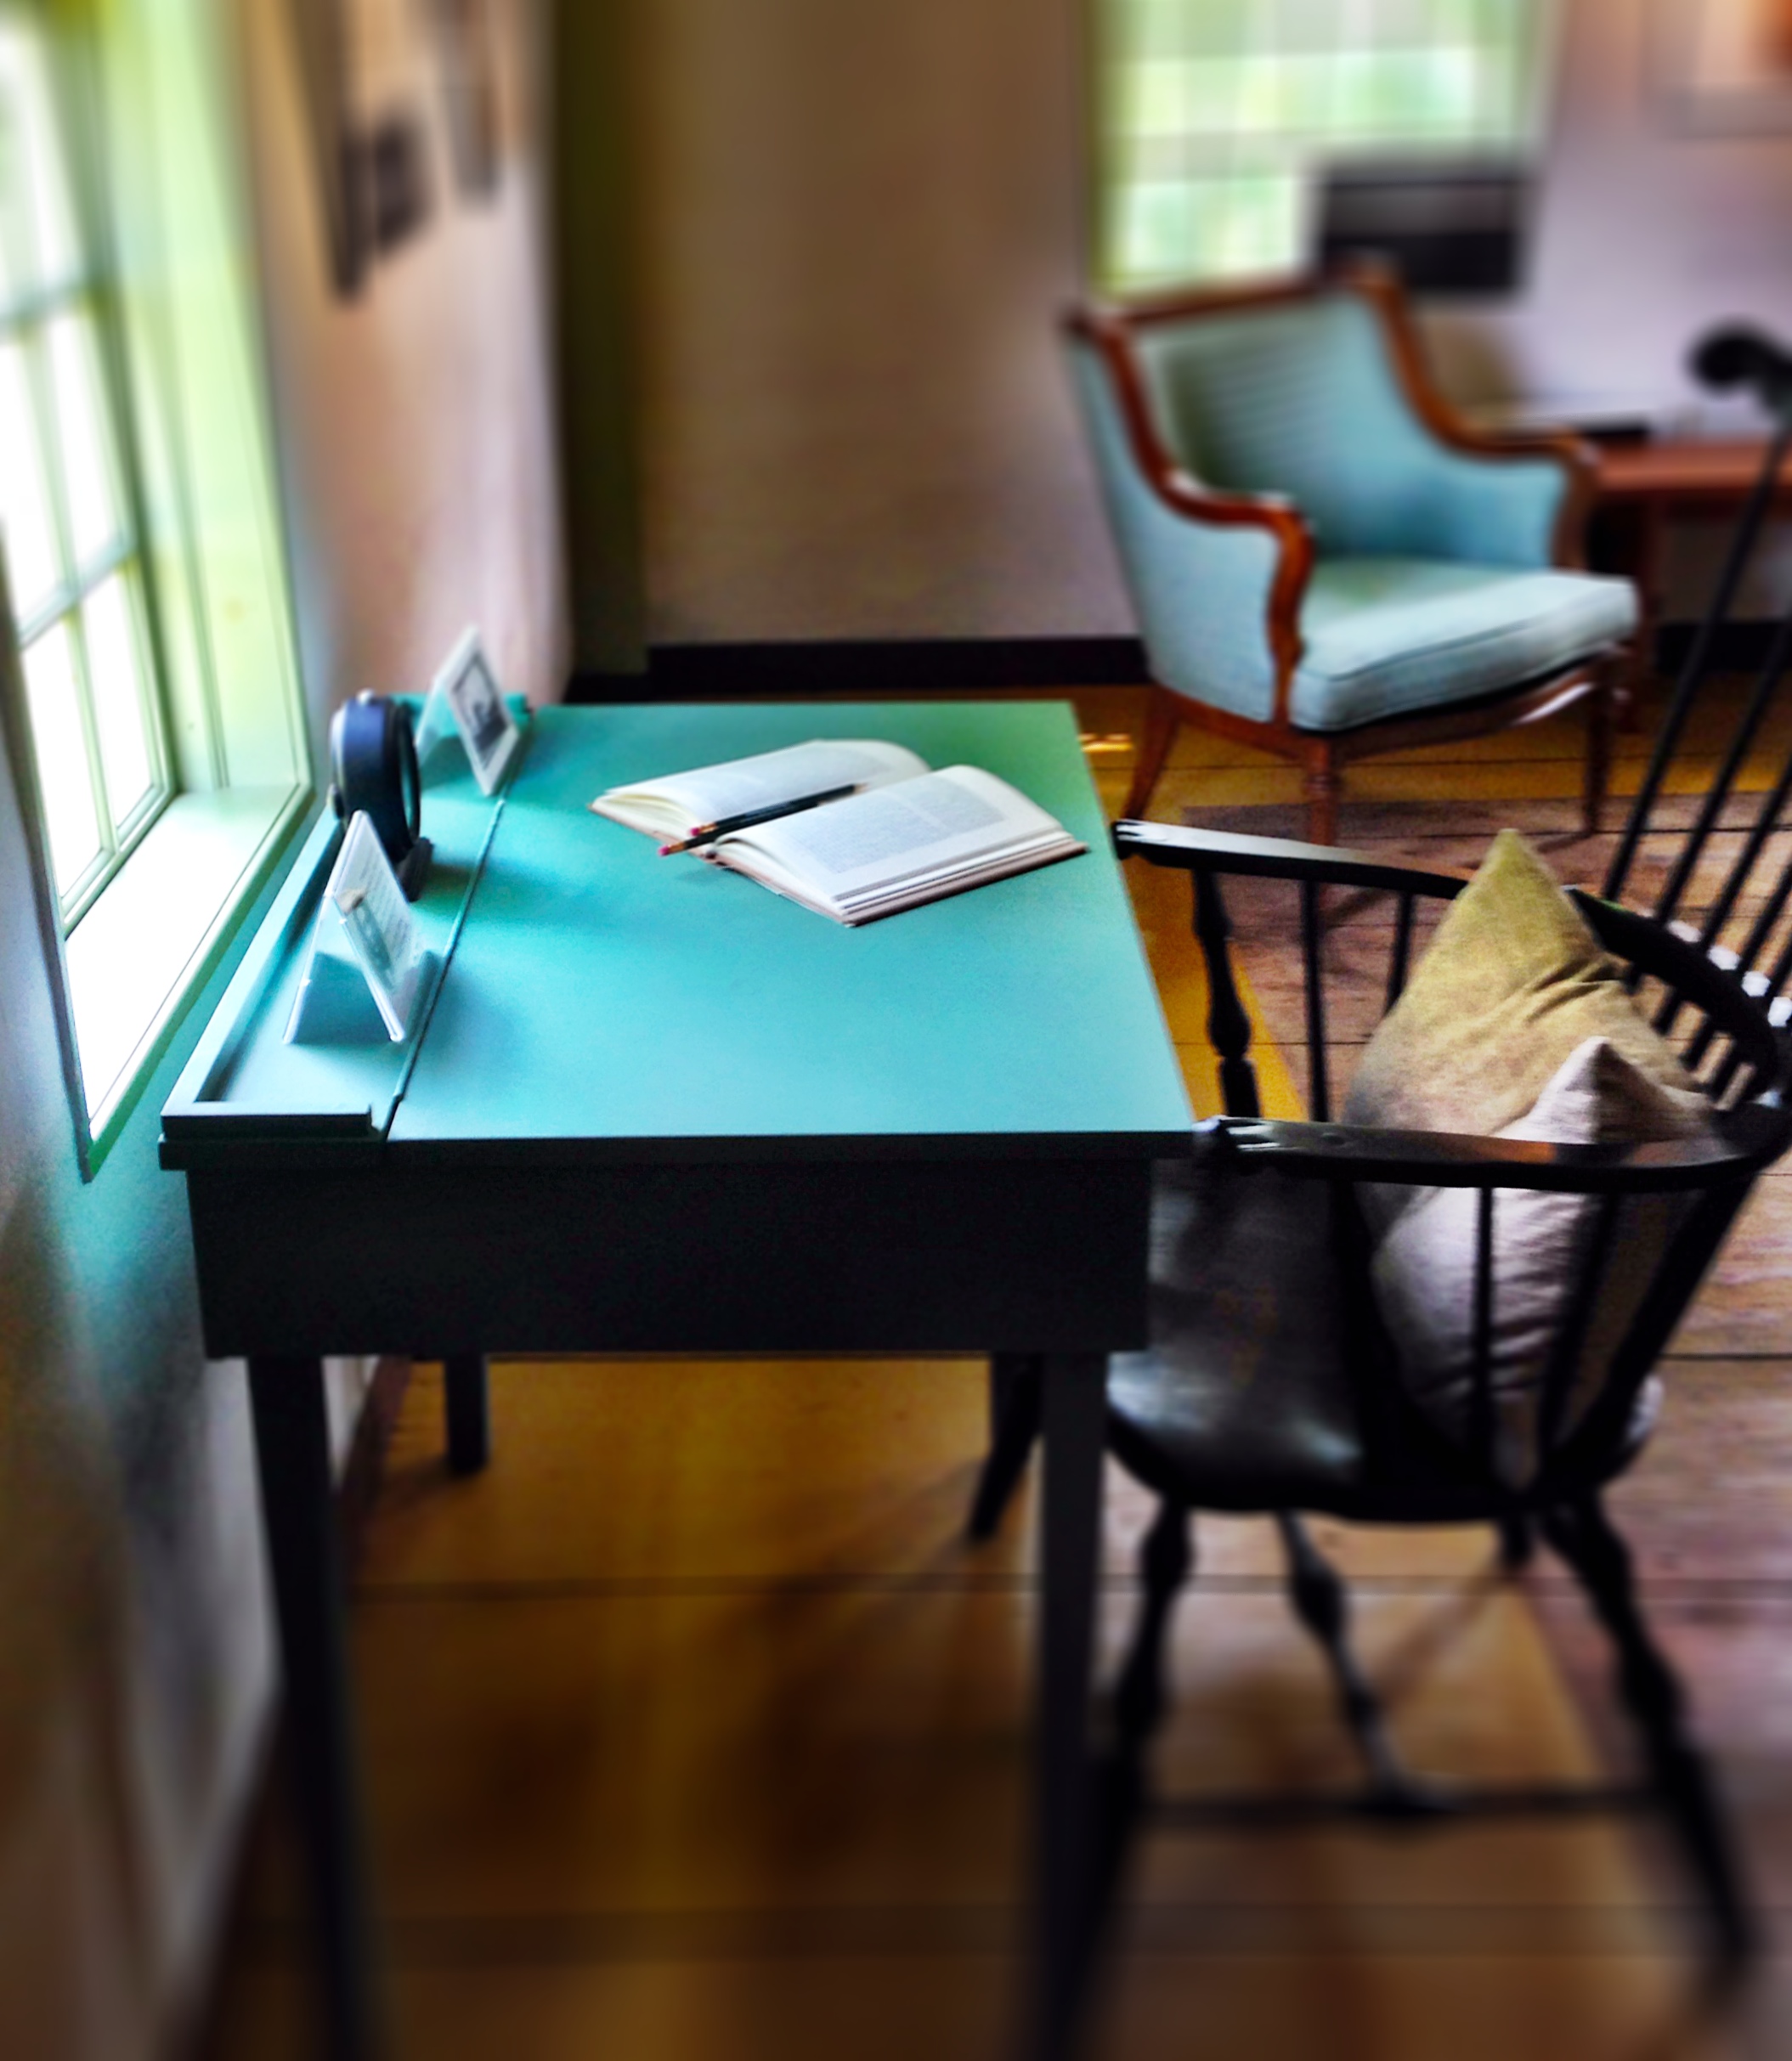 Use the room where Henry David Thoreau was born — “the birthplace of ideas” — as an inspiring writing retreat to create your own masterpiece.